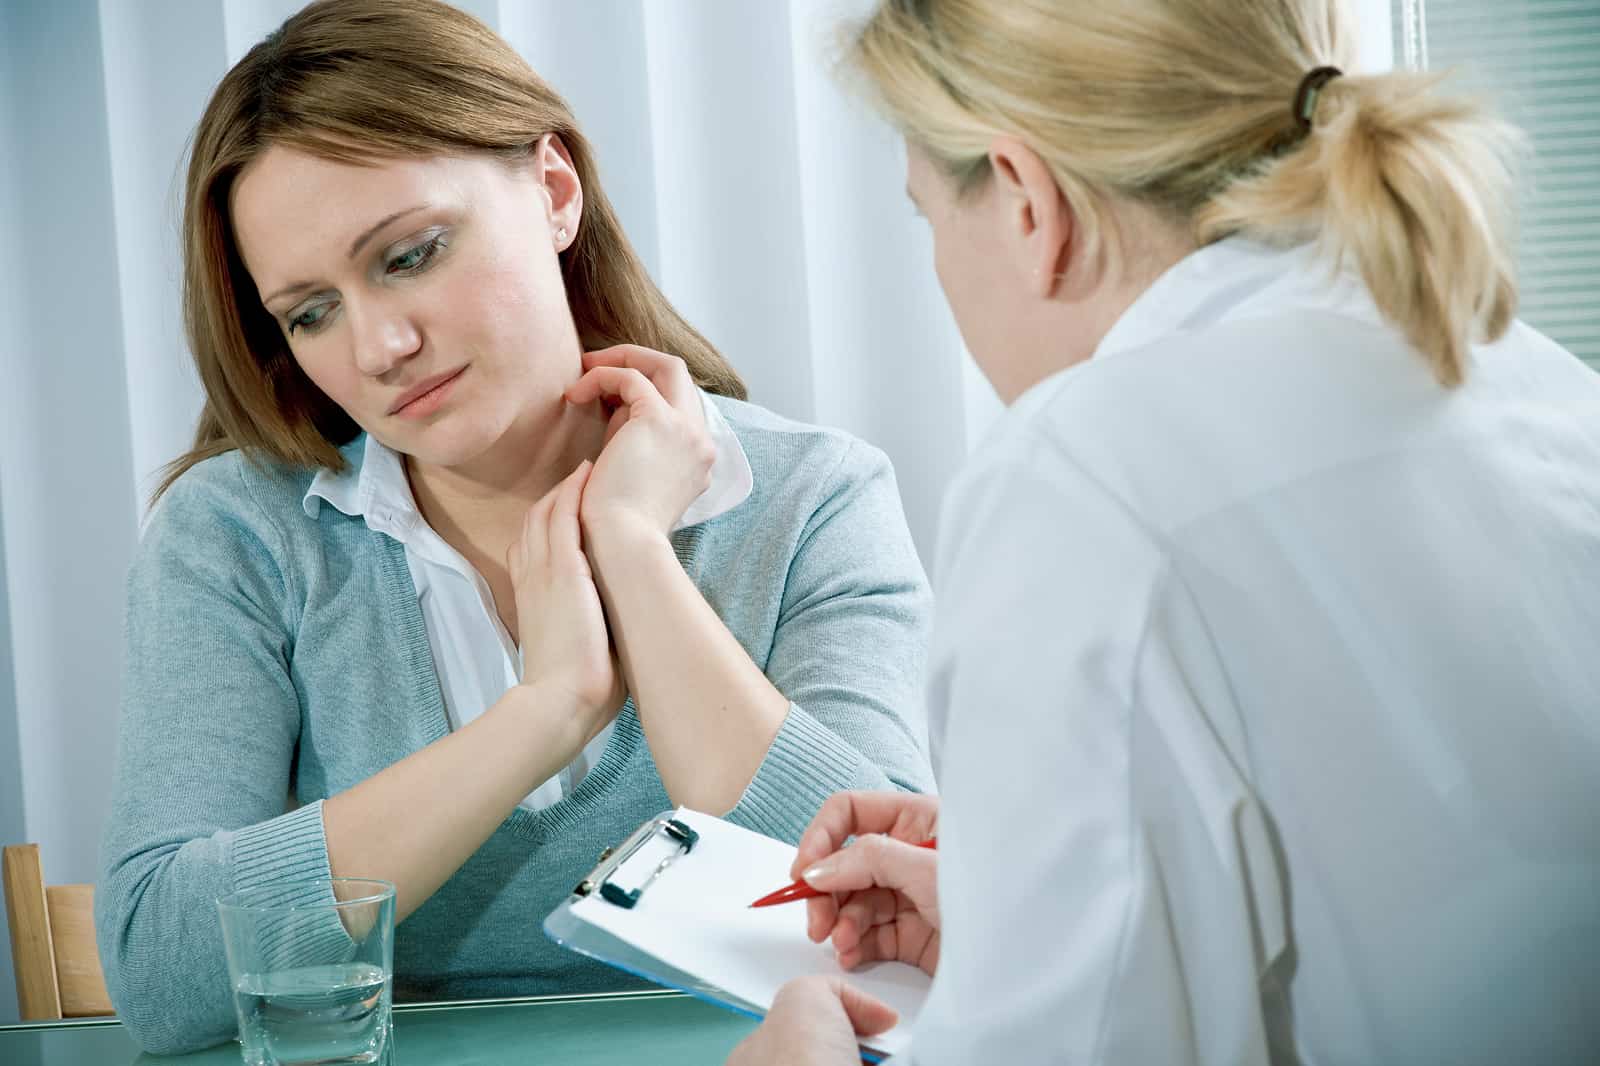 We are specializing in treating depression, anxiety, chronic and acute pain arising from injury (sport, work-related, motor vehicle accident, slip-and-fall, etc.) and medical conditions. For Novo Medical Services, patient care has always been paramount, with no allowance for compromise. We serve patients from all over the GTA, including Toronto, Oakville, Newmarket, Aurora, Thornhill, Vaughan, Scarborough, Markham, Brampton, North York, and Mississauga, and from all over the rest of Ontario, including Kitchener, Hamilton, Oakville, Burlington.